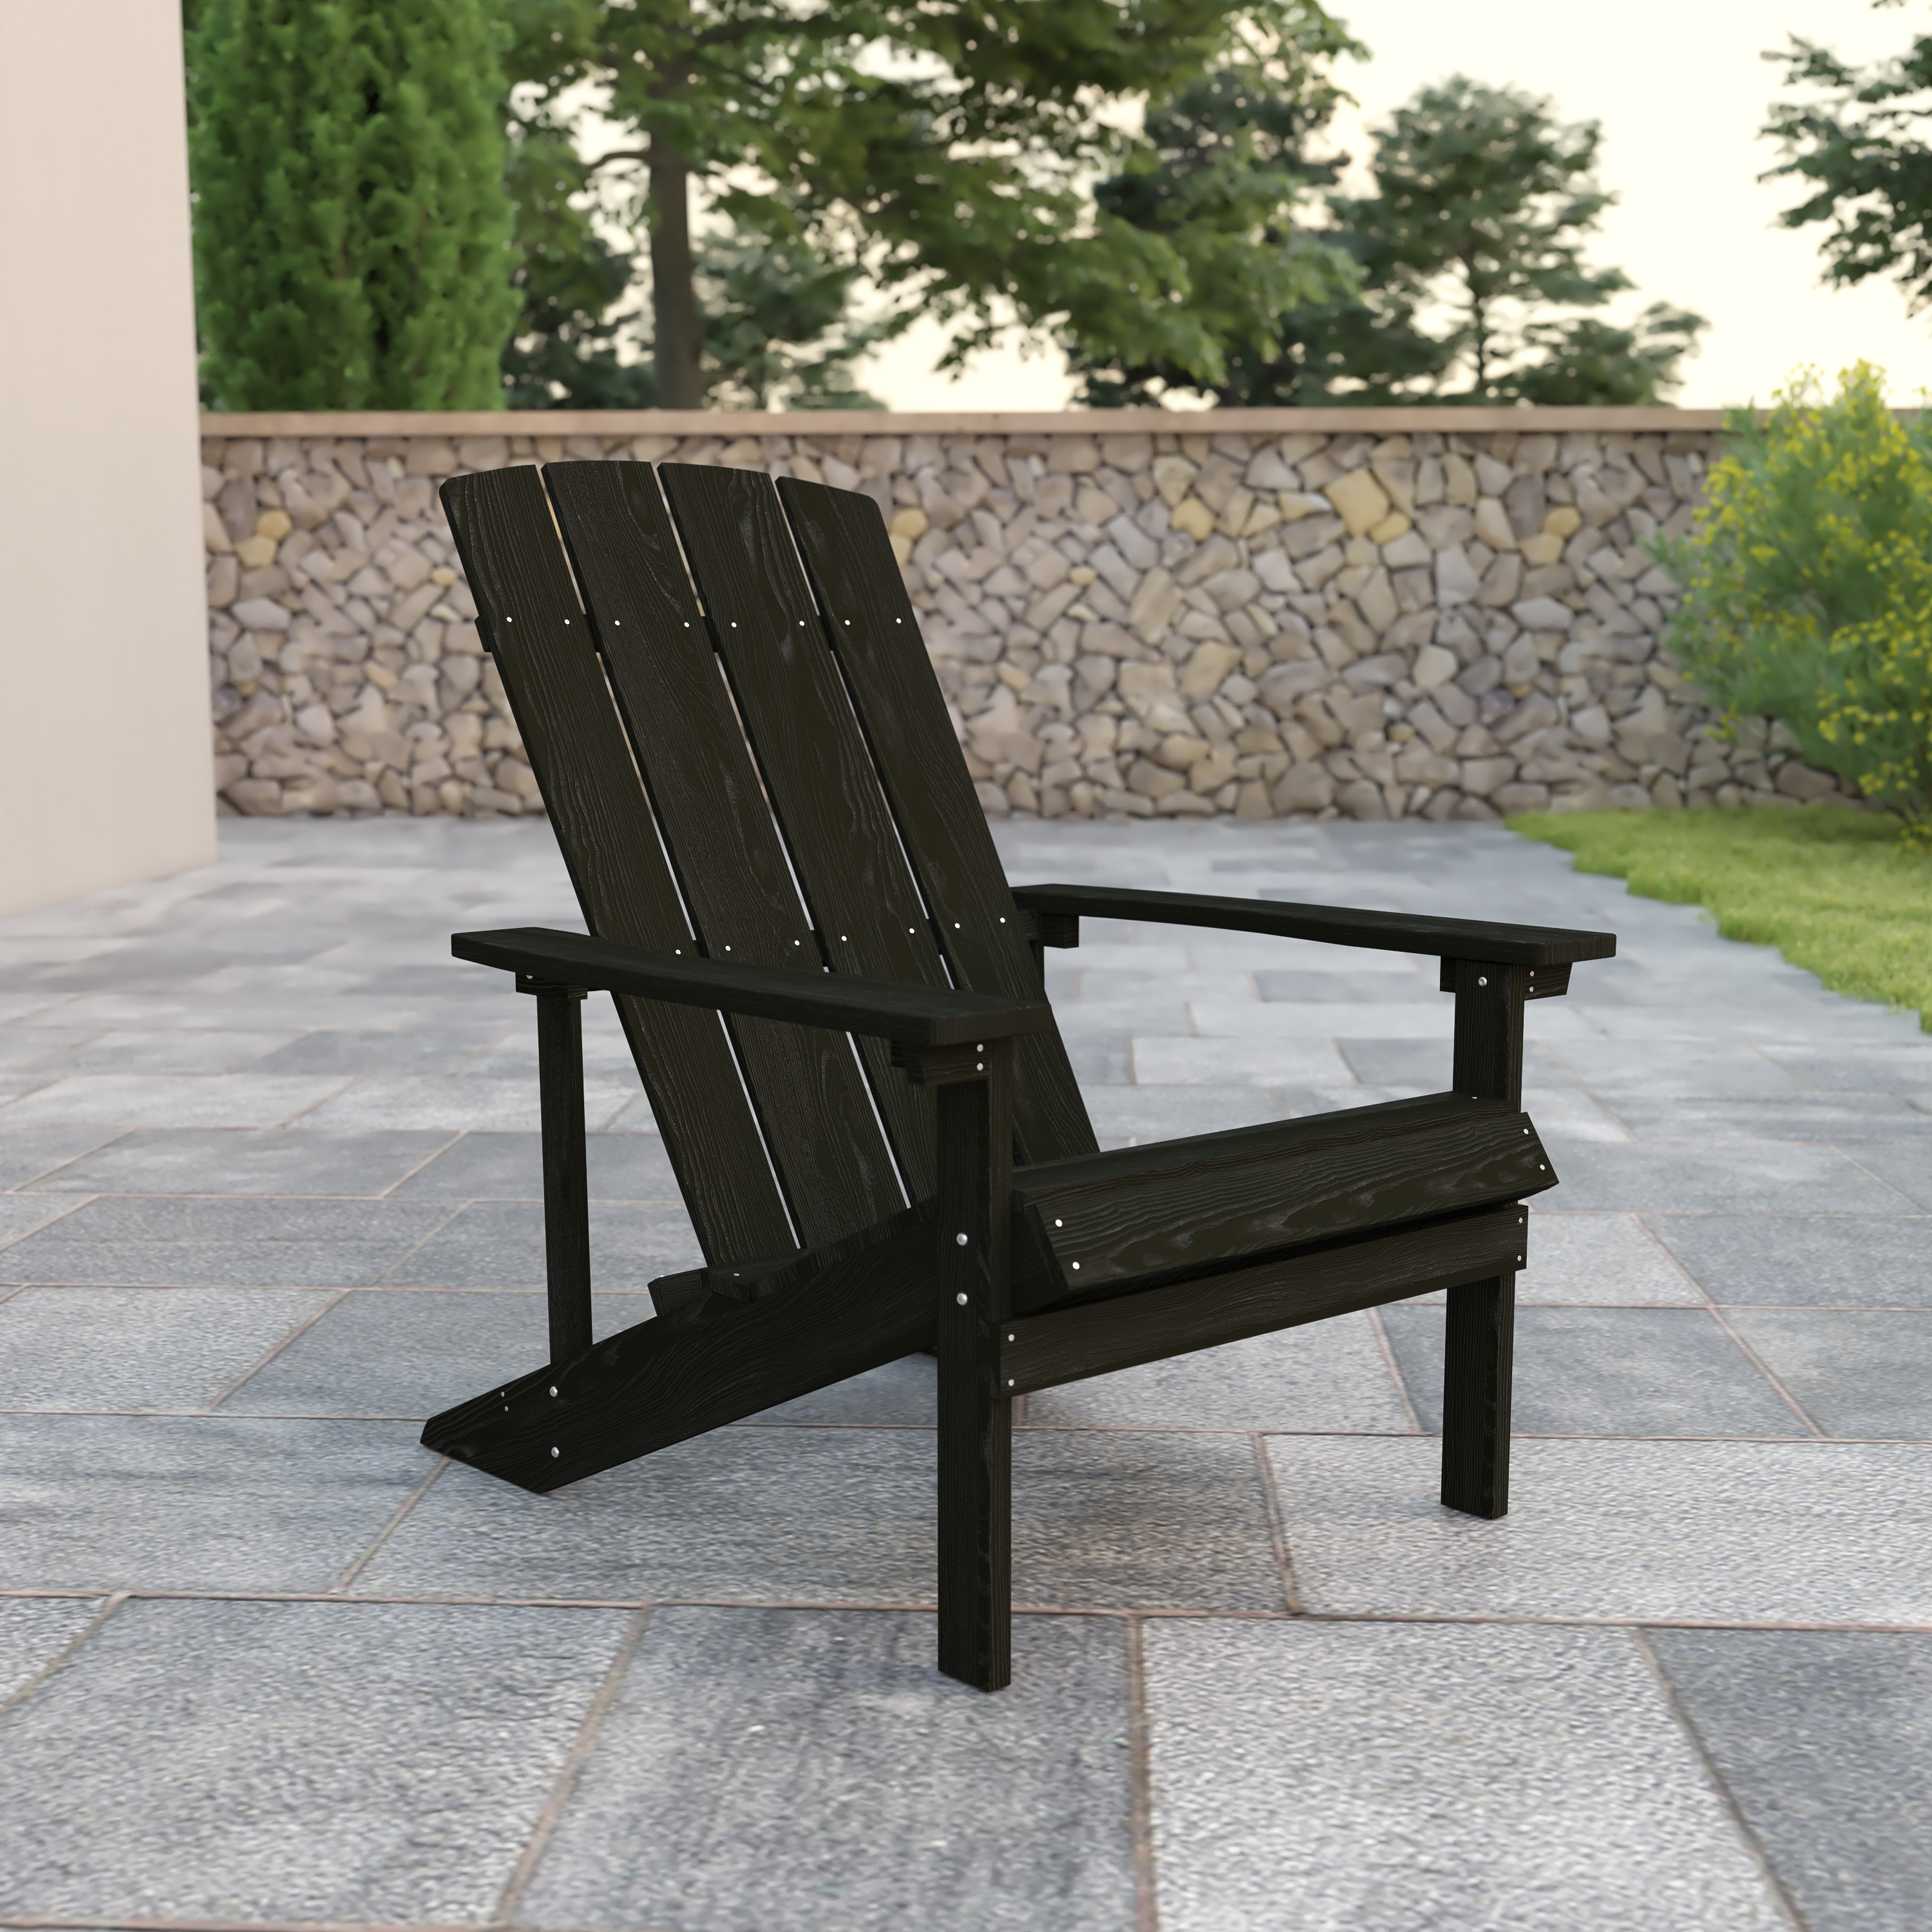 Flash Furniture Charlestown All-Weather Poly Resin Wood Adirondack Chair in Slate Gray - image 1 of 11